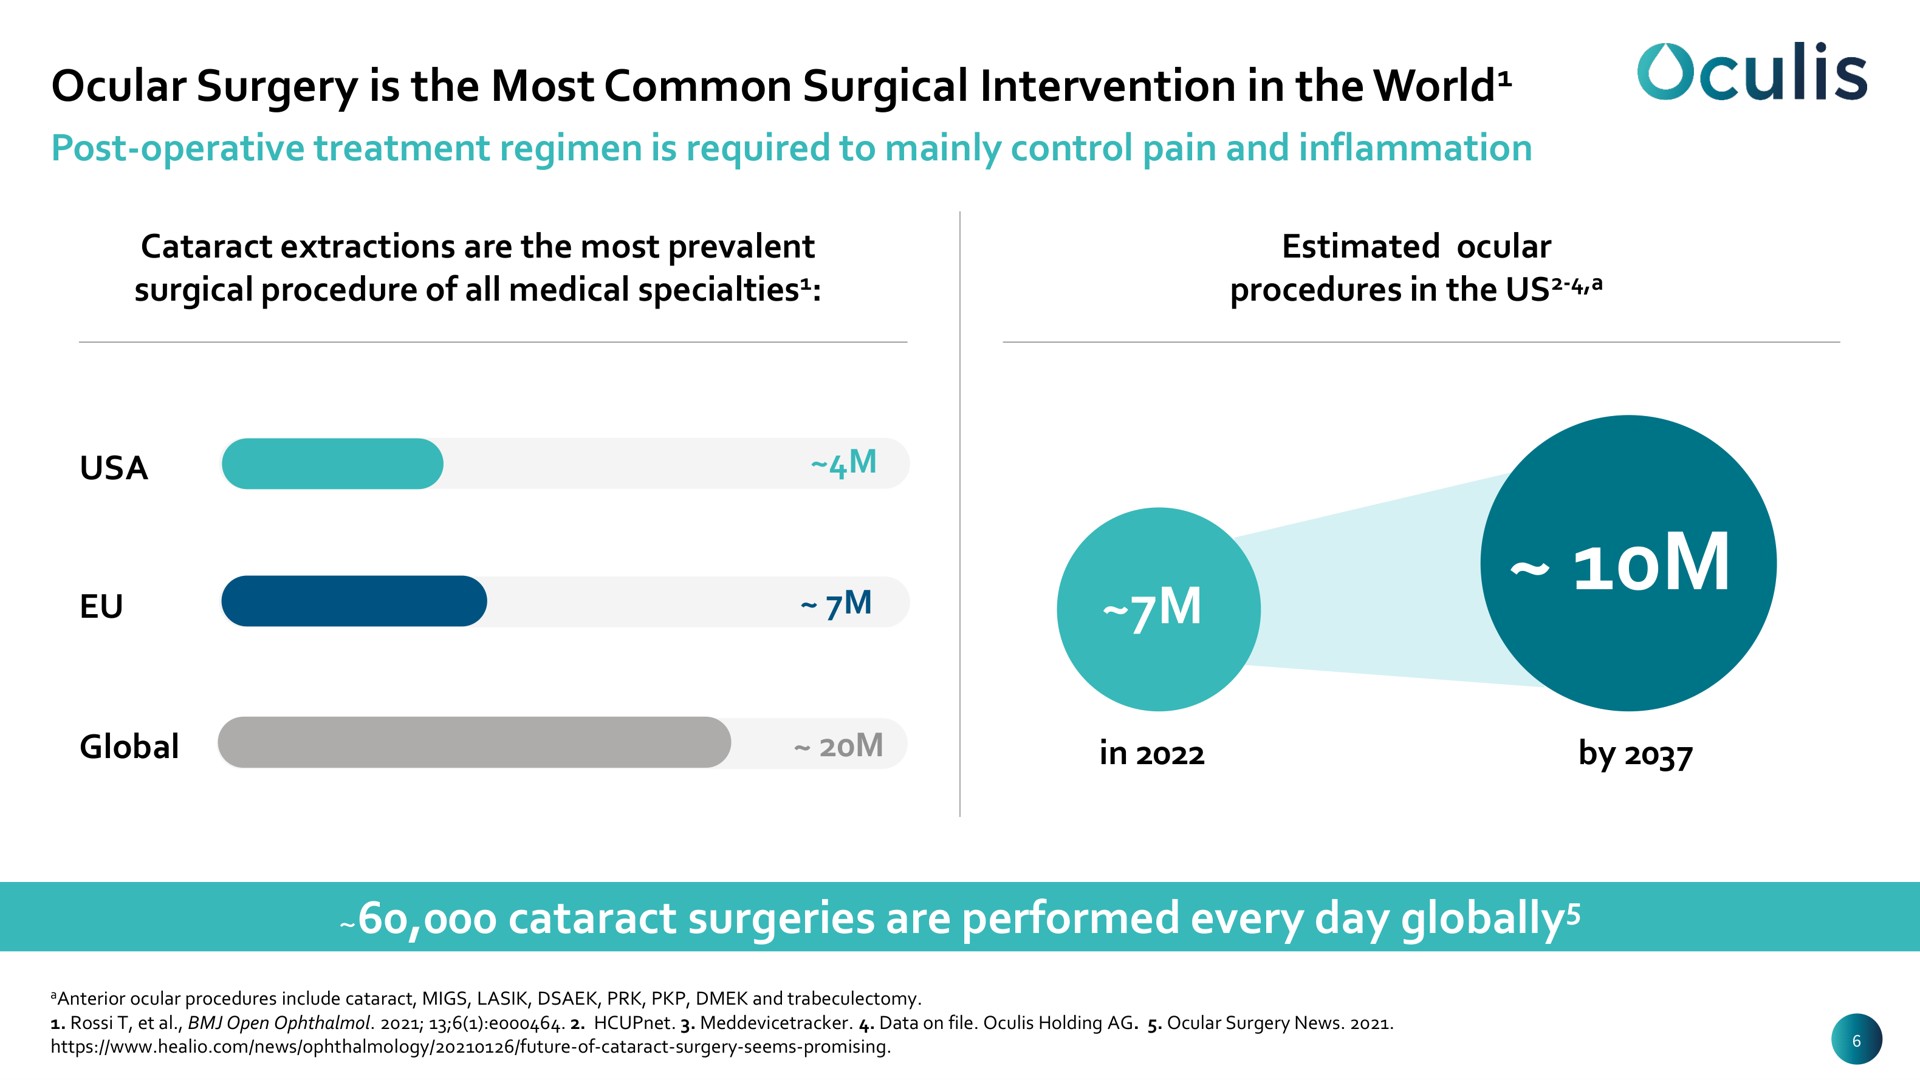 ocular surgery is the most common surgical intervention in the world cataract surgeries are performed every day globally world global | Oculis